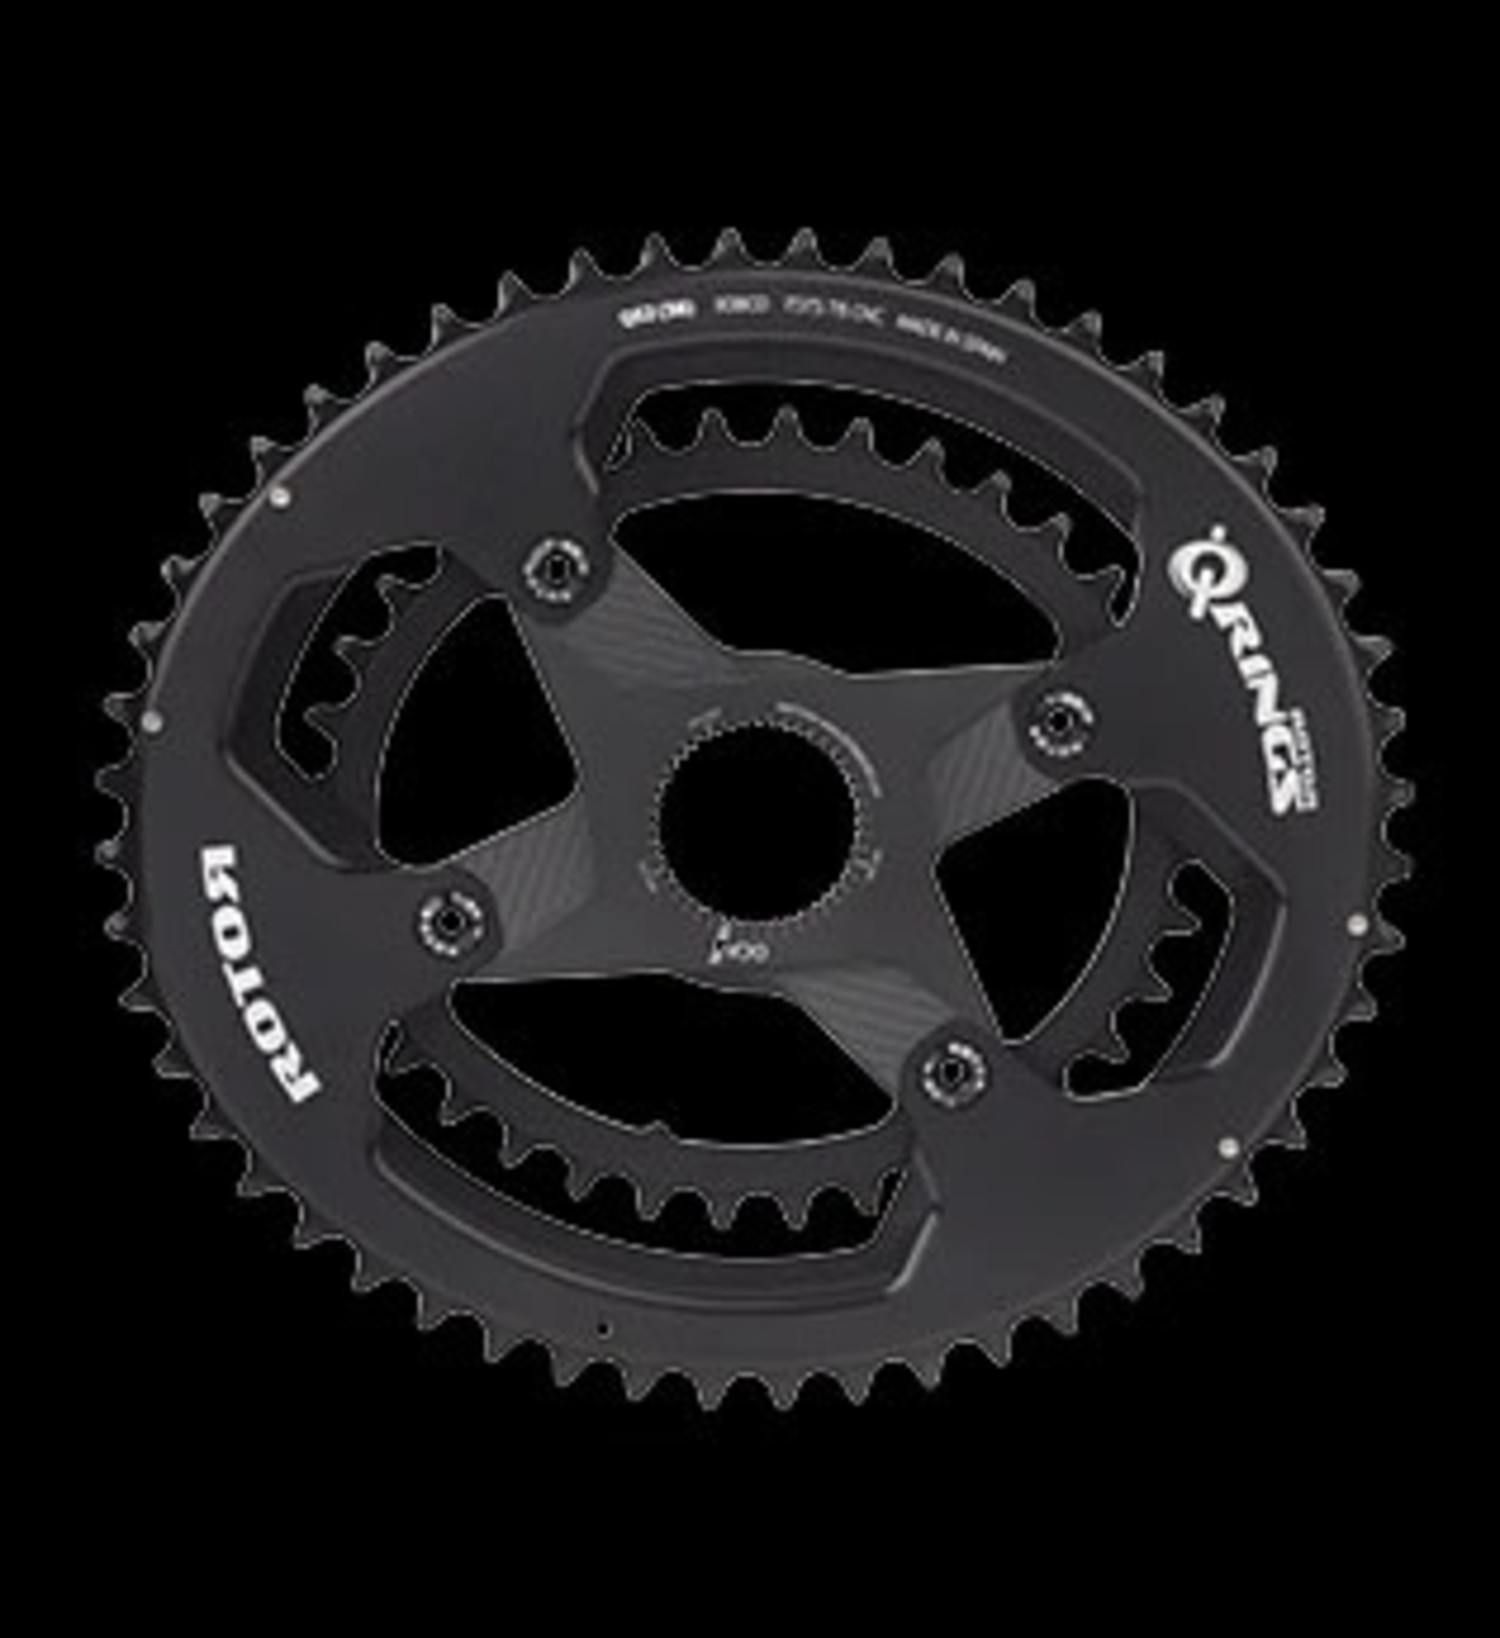 Rotor 110 x 4 Bolt Outer Q-Ring (Oval) - Chain Reaction Bicycles Inc.